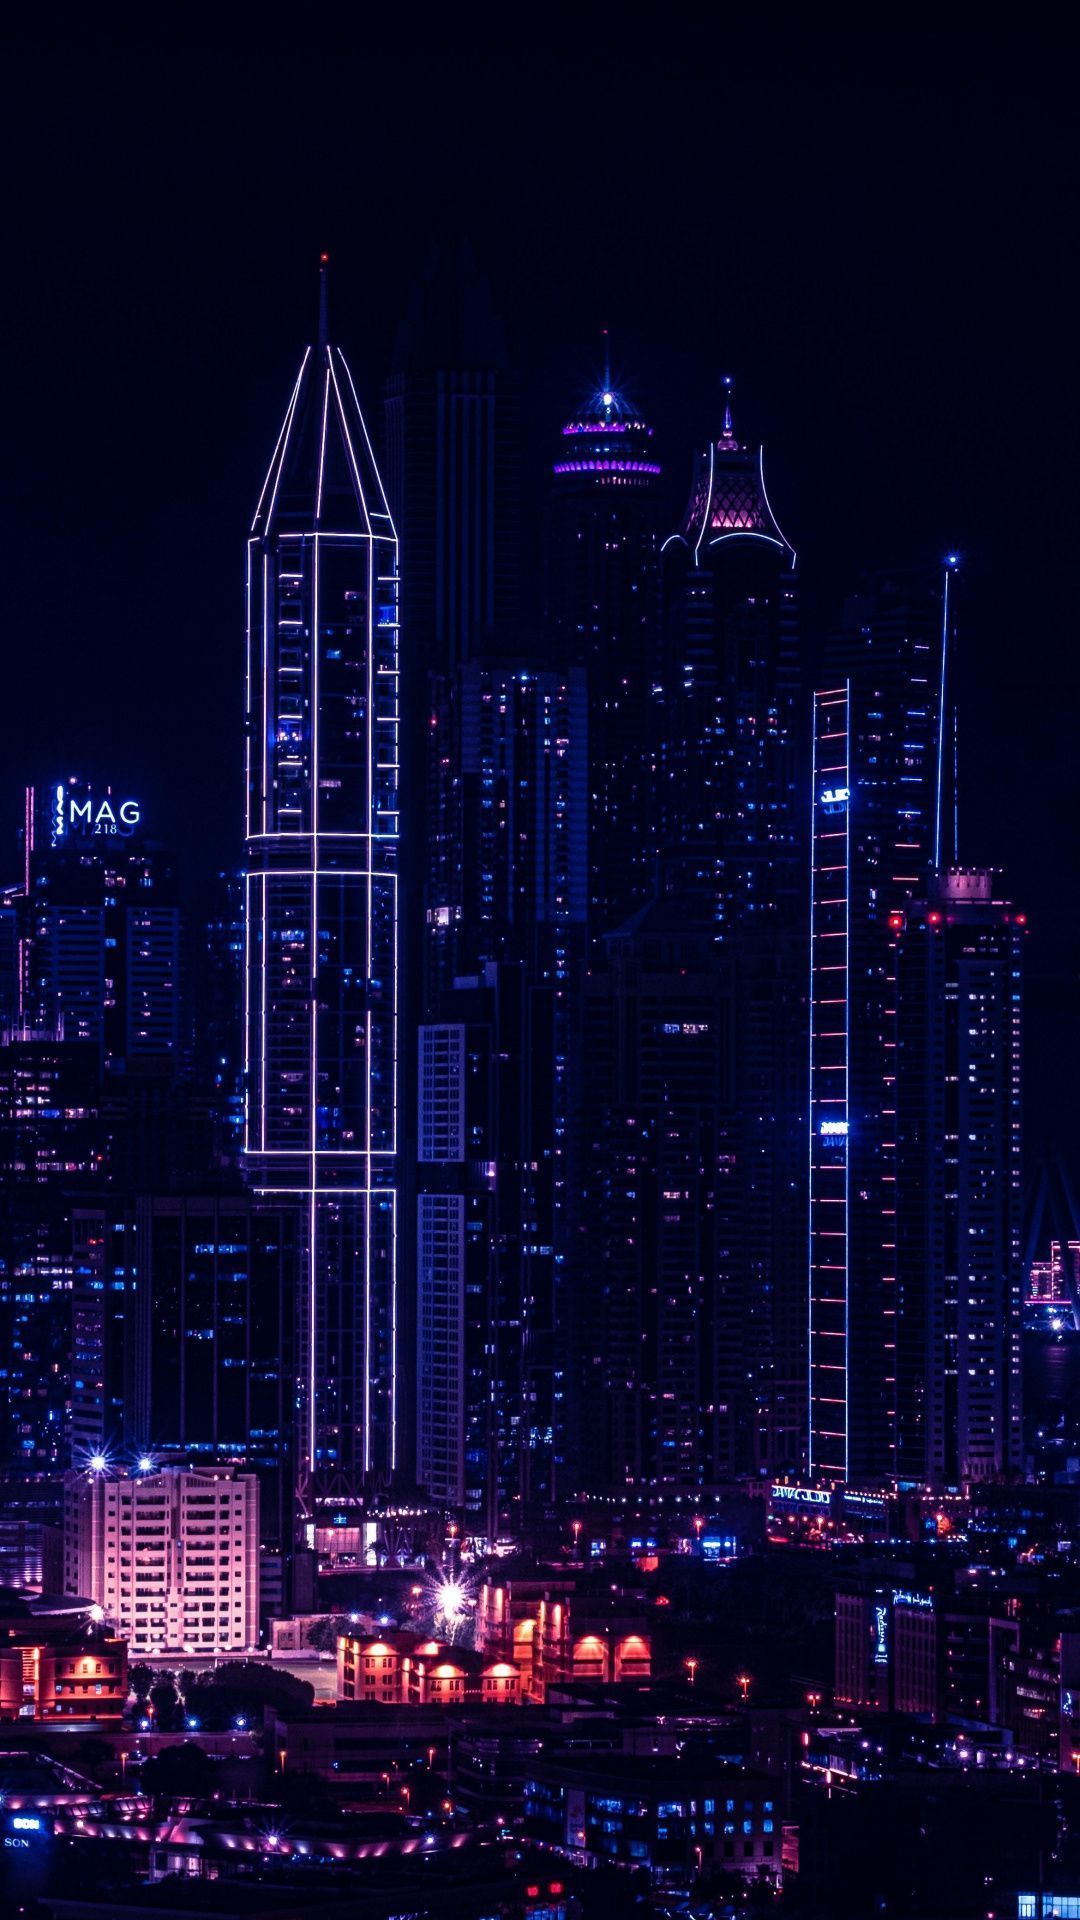 A city at night with many lights - Cityscape